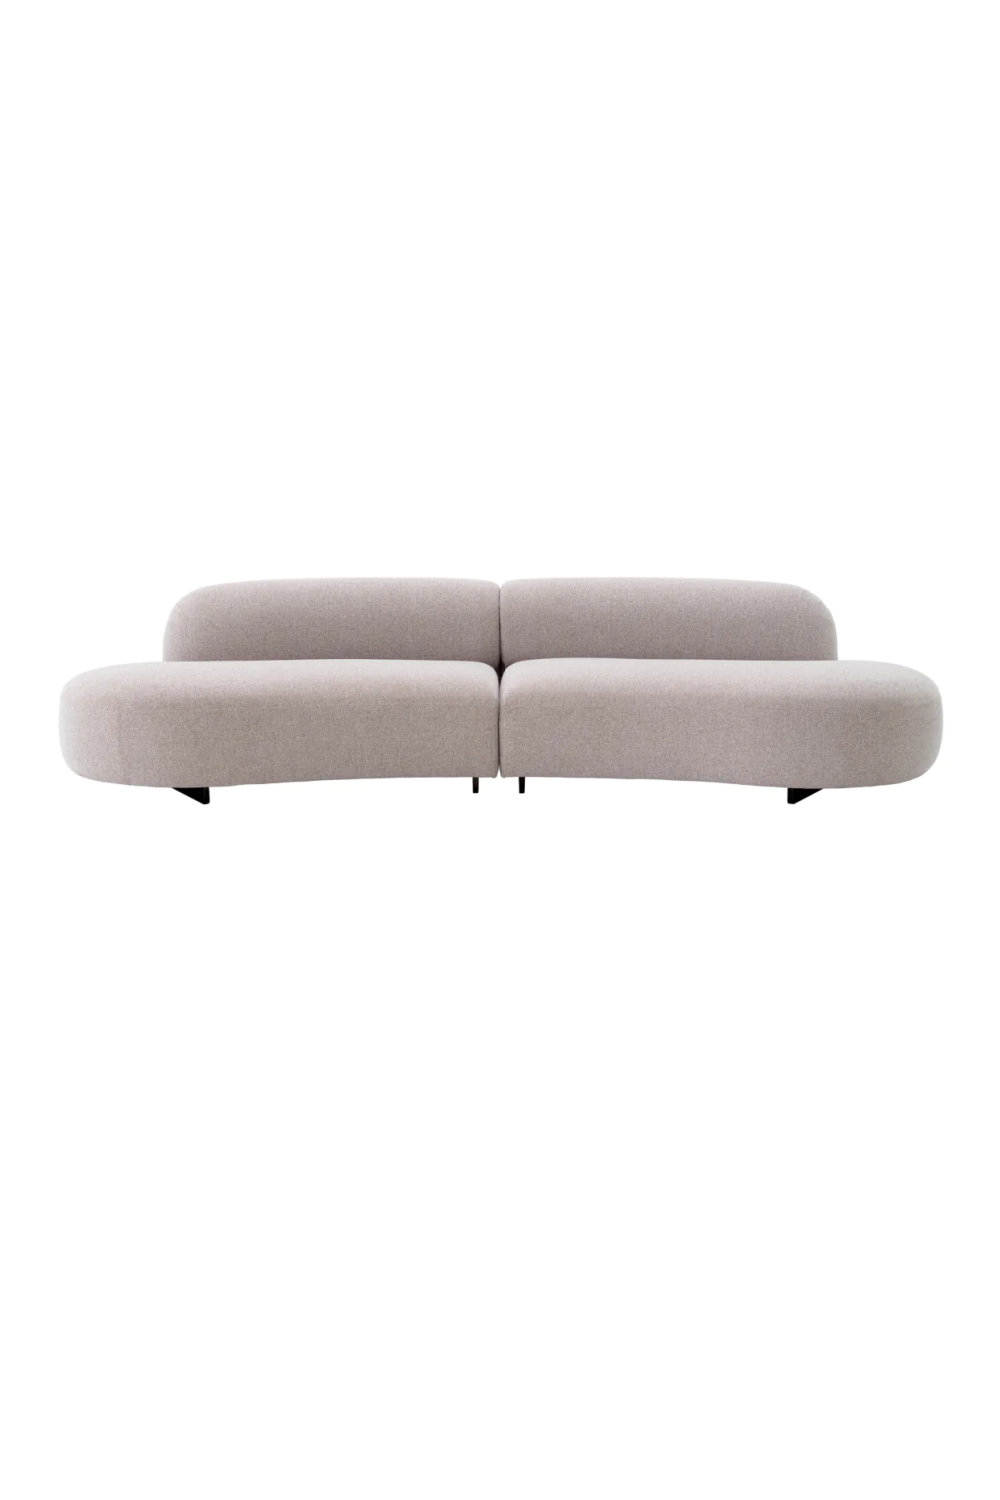 Image of Light Gray Curved Outdoor Sofa | Eichholtz Bjrn